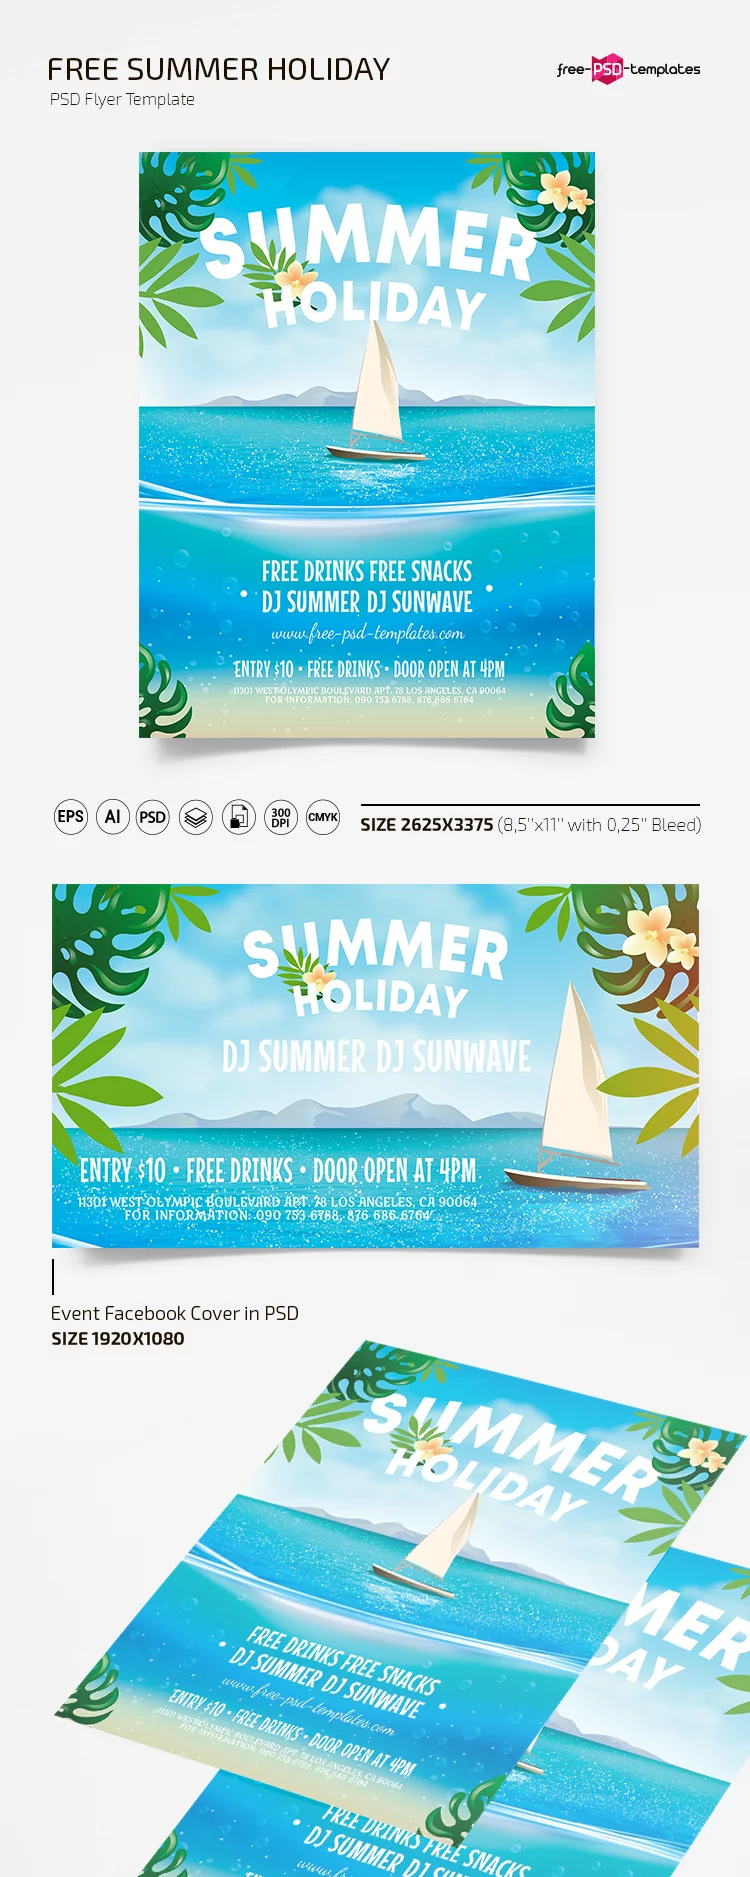 Free Summer Holiday Flyer Template in PSD + AI